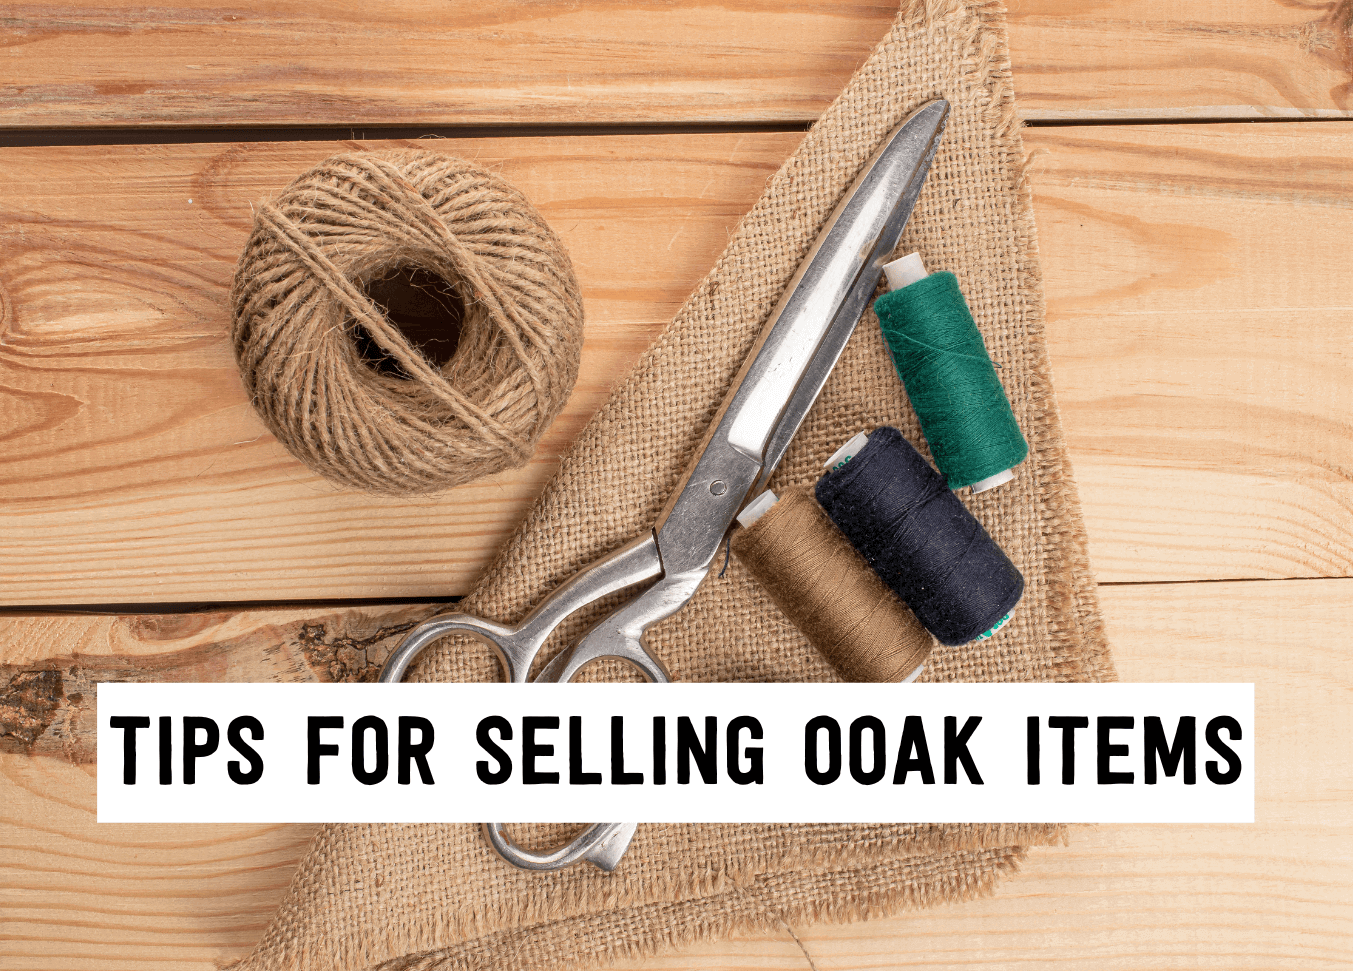 Tips for selling ooak items | Tizzit.co - start and grow a successful handmade business